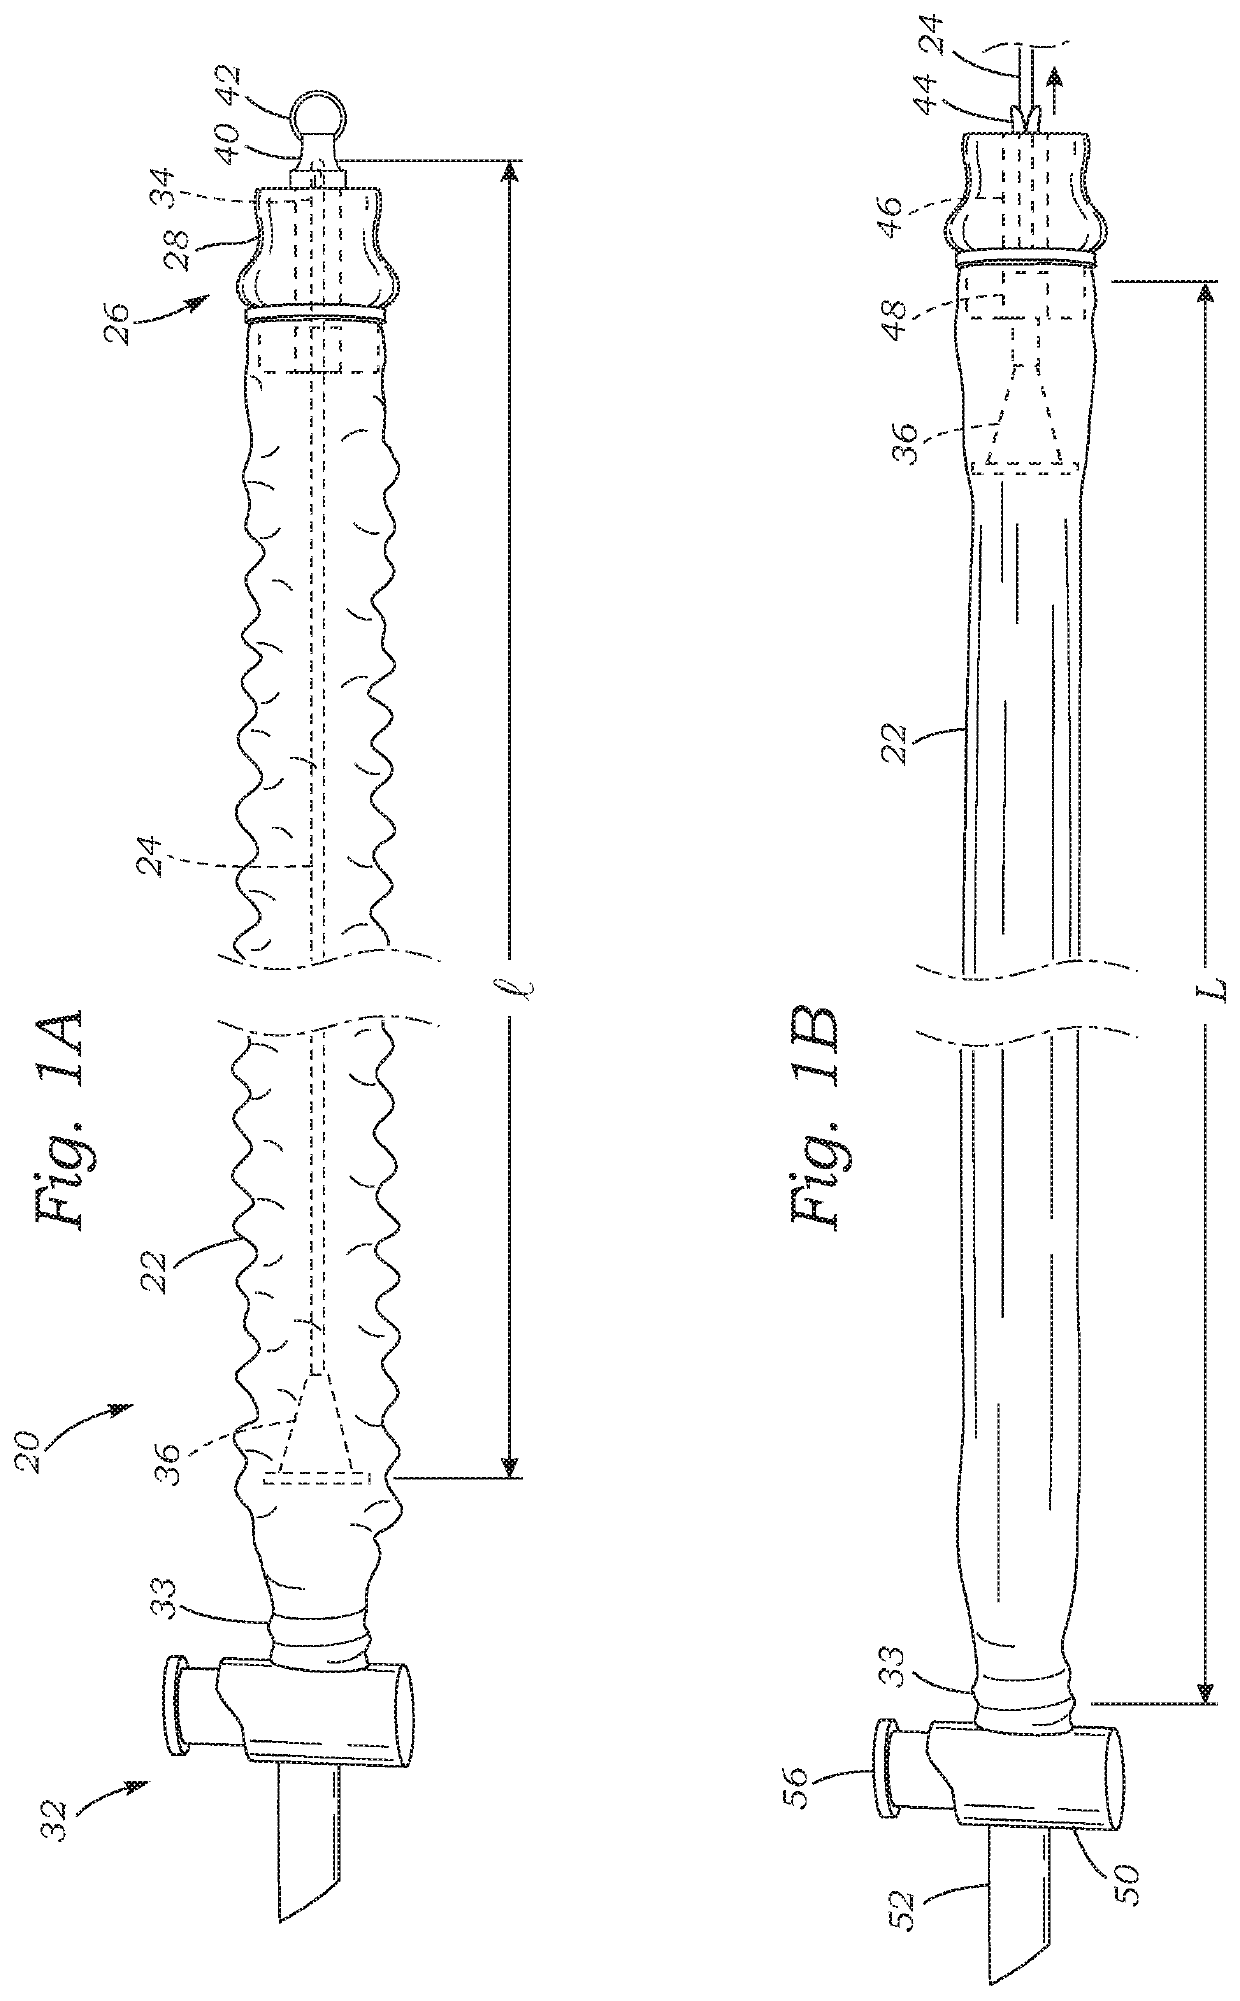 Methods of urinary catheter collection and draining